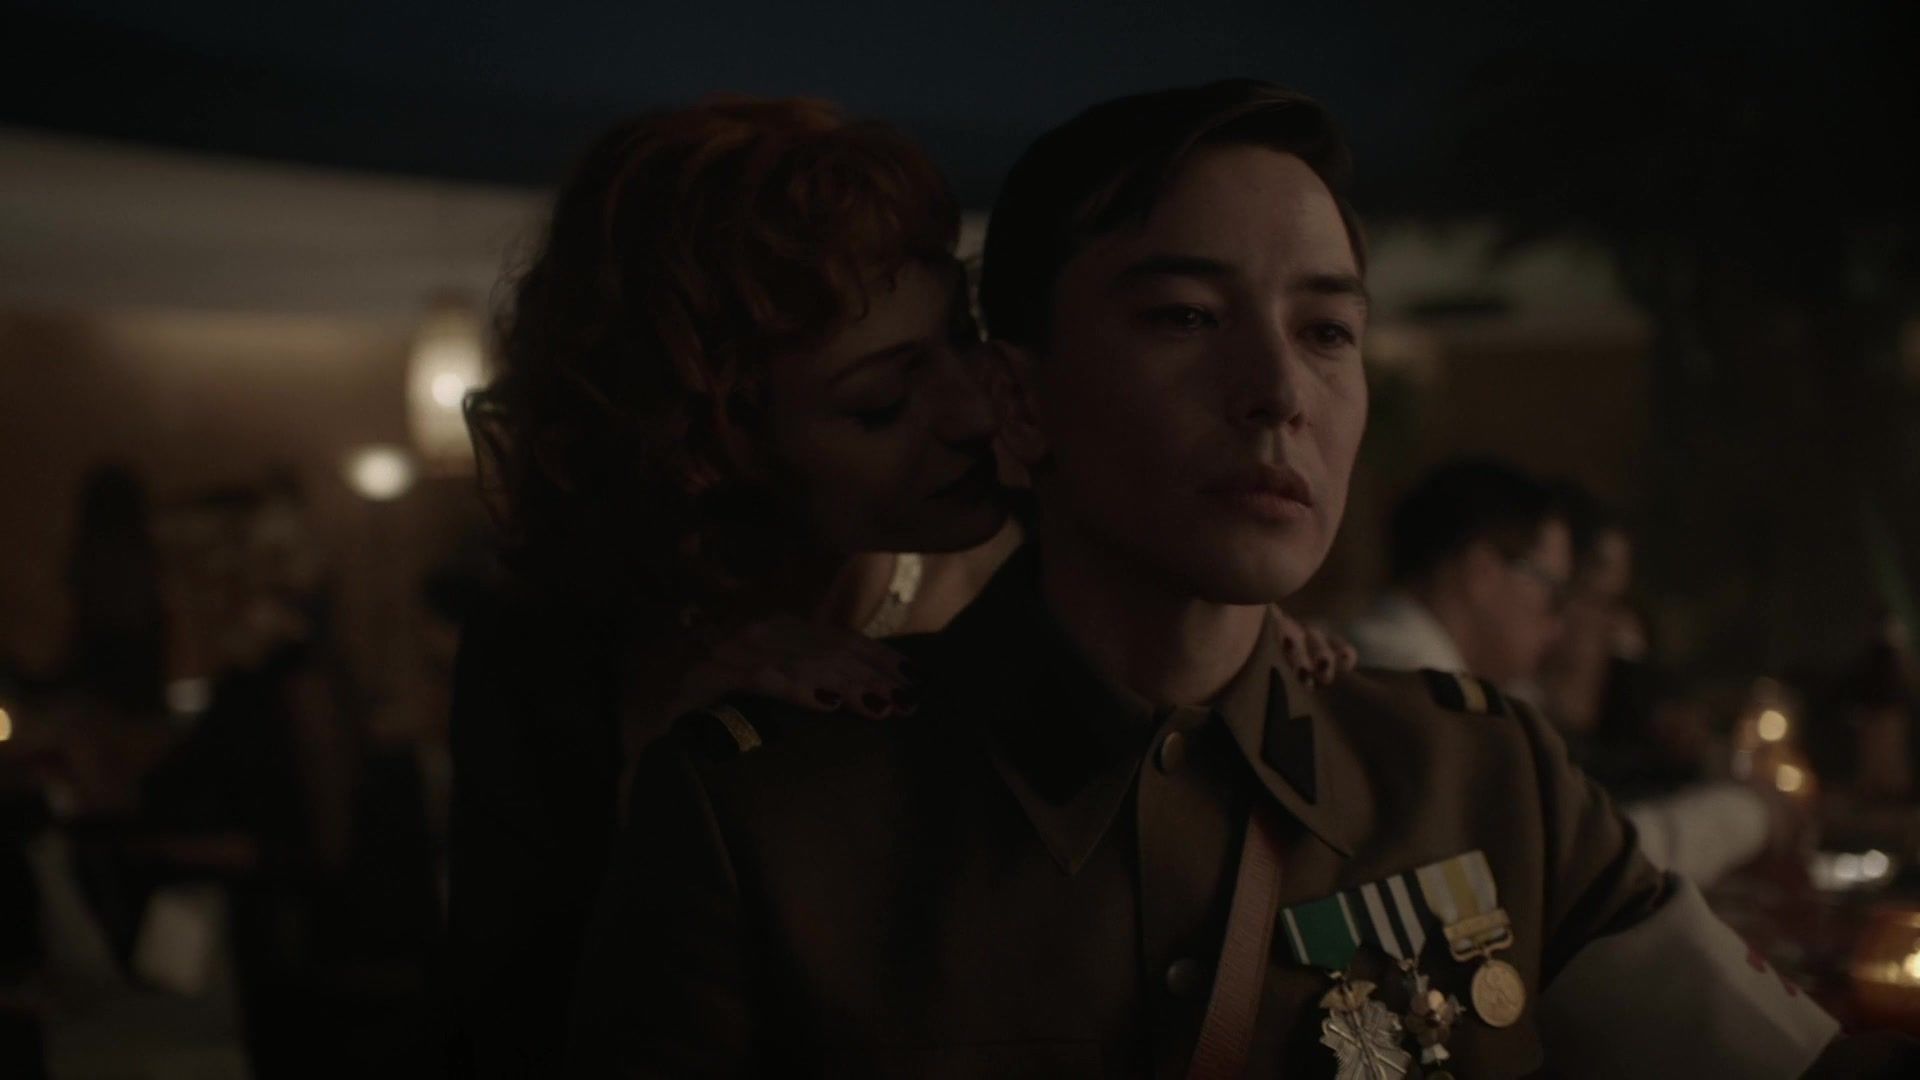 Rimming Nude Destiny Millns - The Man in the High Castle s04e03 (2019) CumSluts - 1